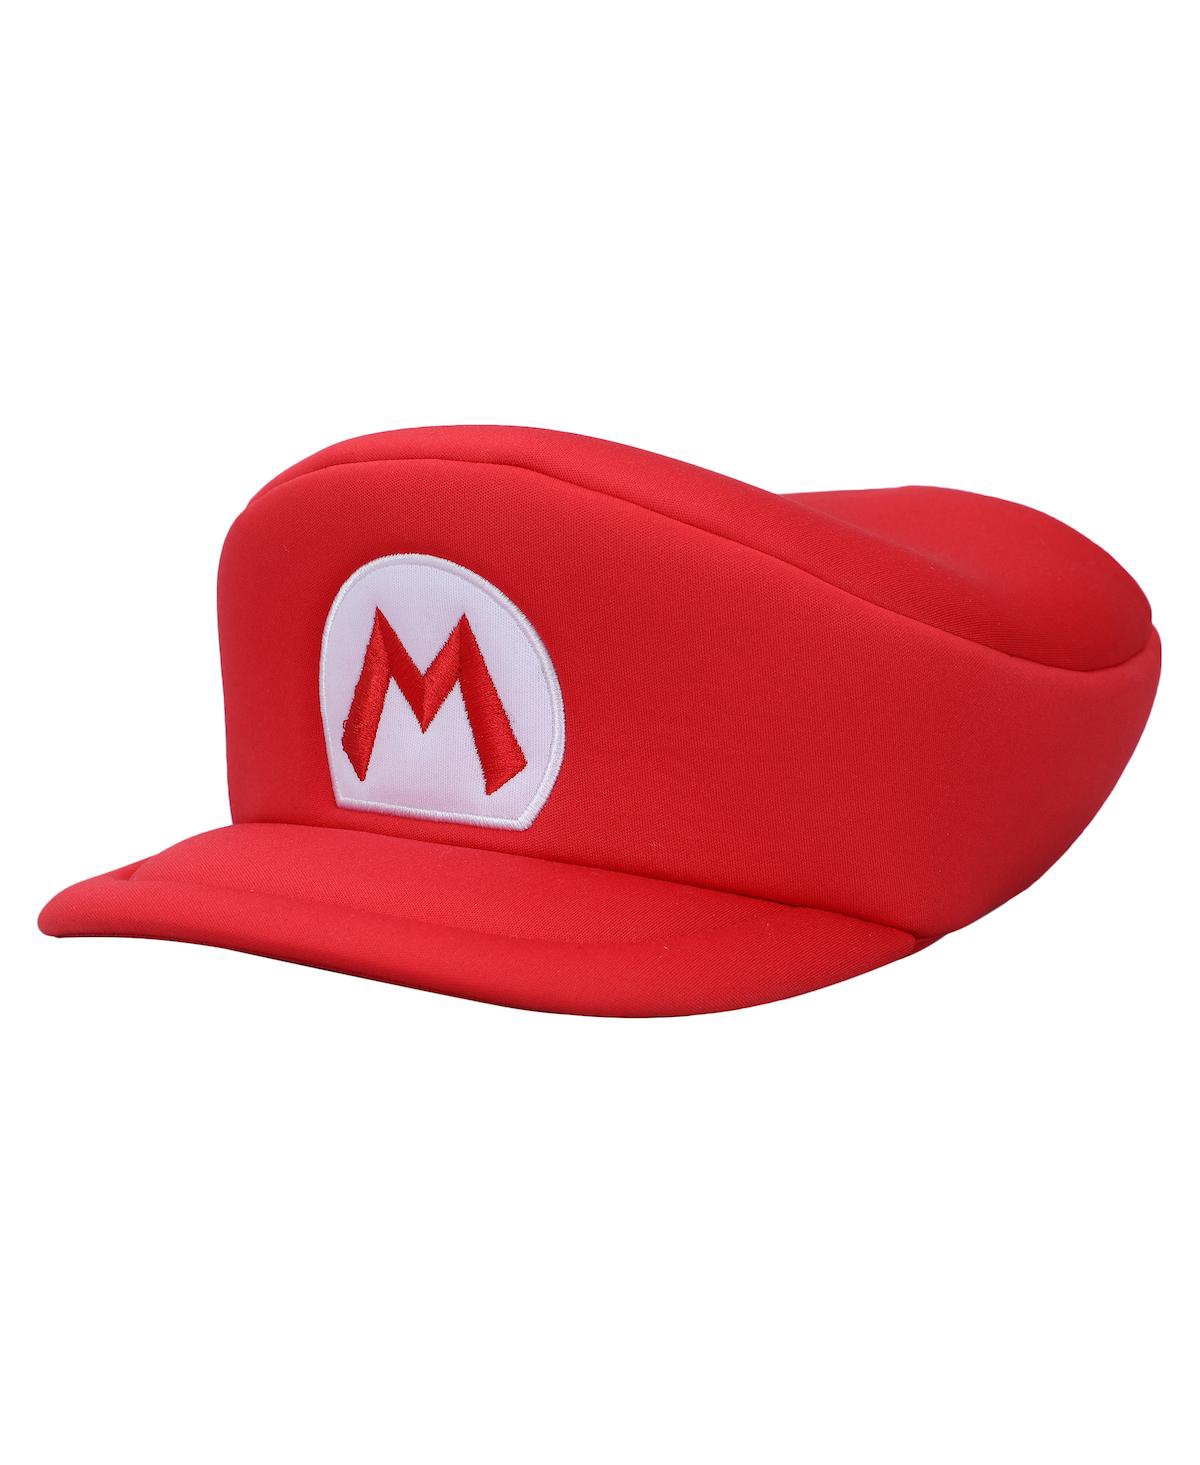 Men's Bros Embroidered Mario M Patch Red Beret Cap - Red